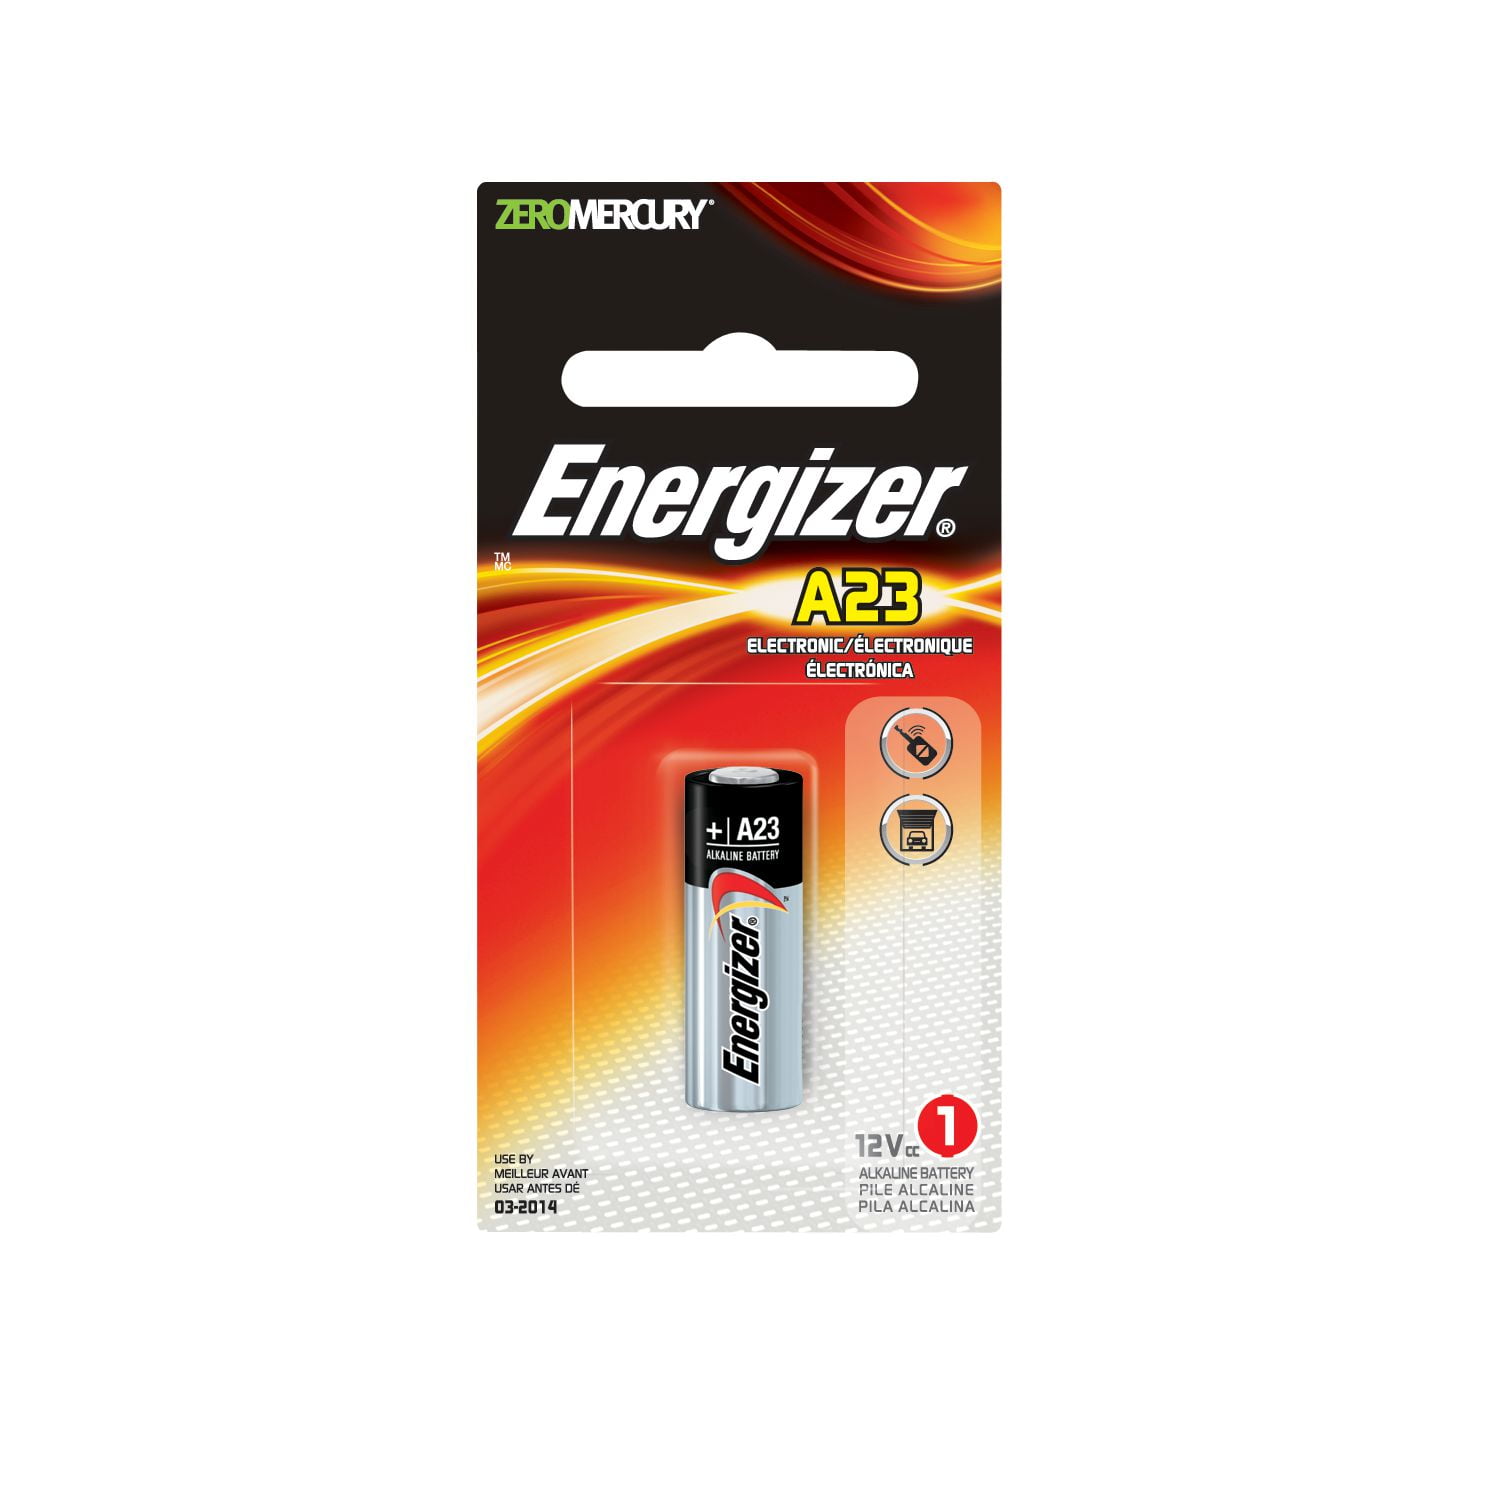 Energizer #A23 Energizer 12 Volt Keyless Entry Battery - Reliable power for  car remotes, garage door openers, 1 each, sold by each 